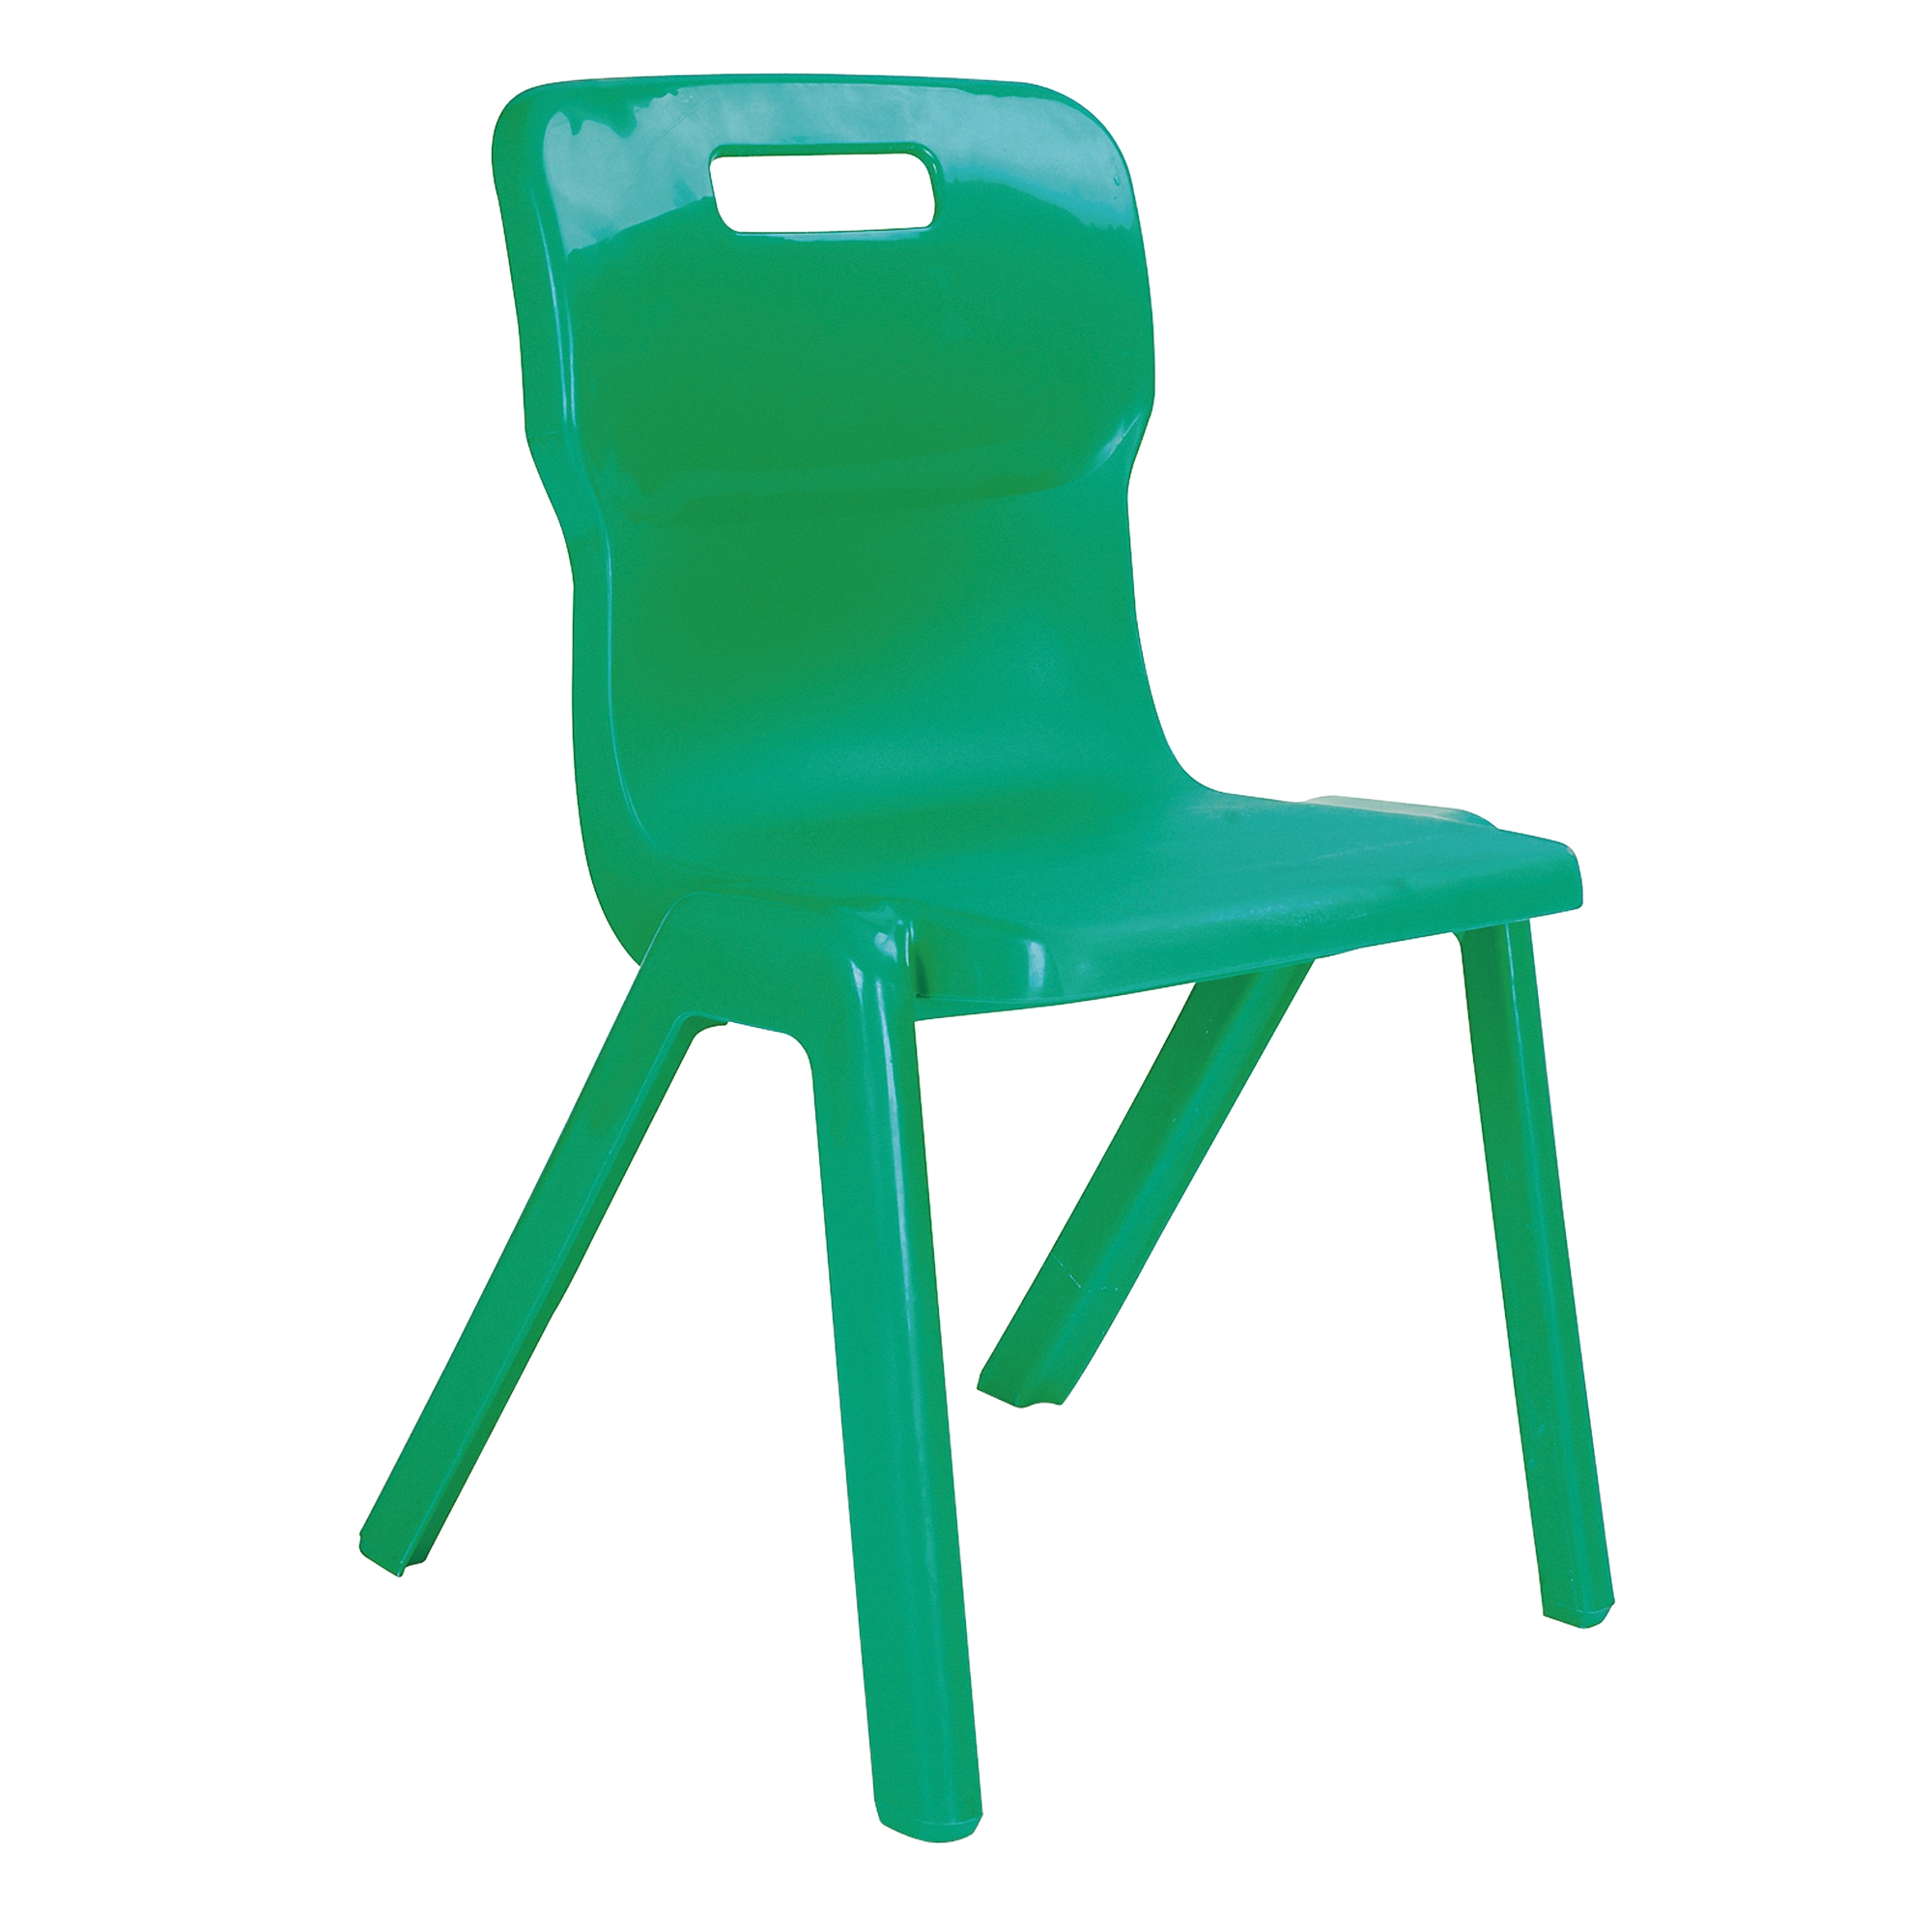 One Piece Titan Chair - Size 1 Ages 3-4 Green